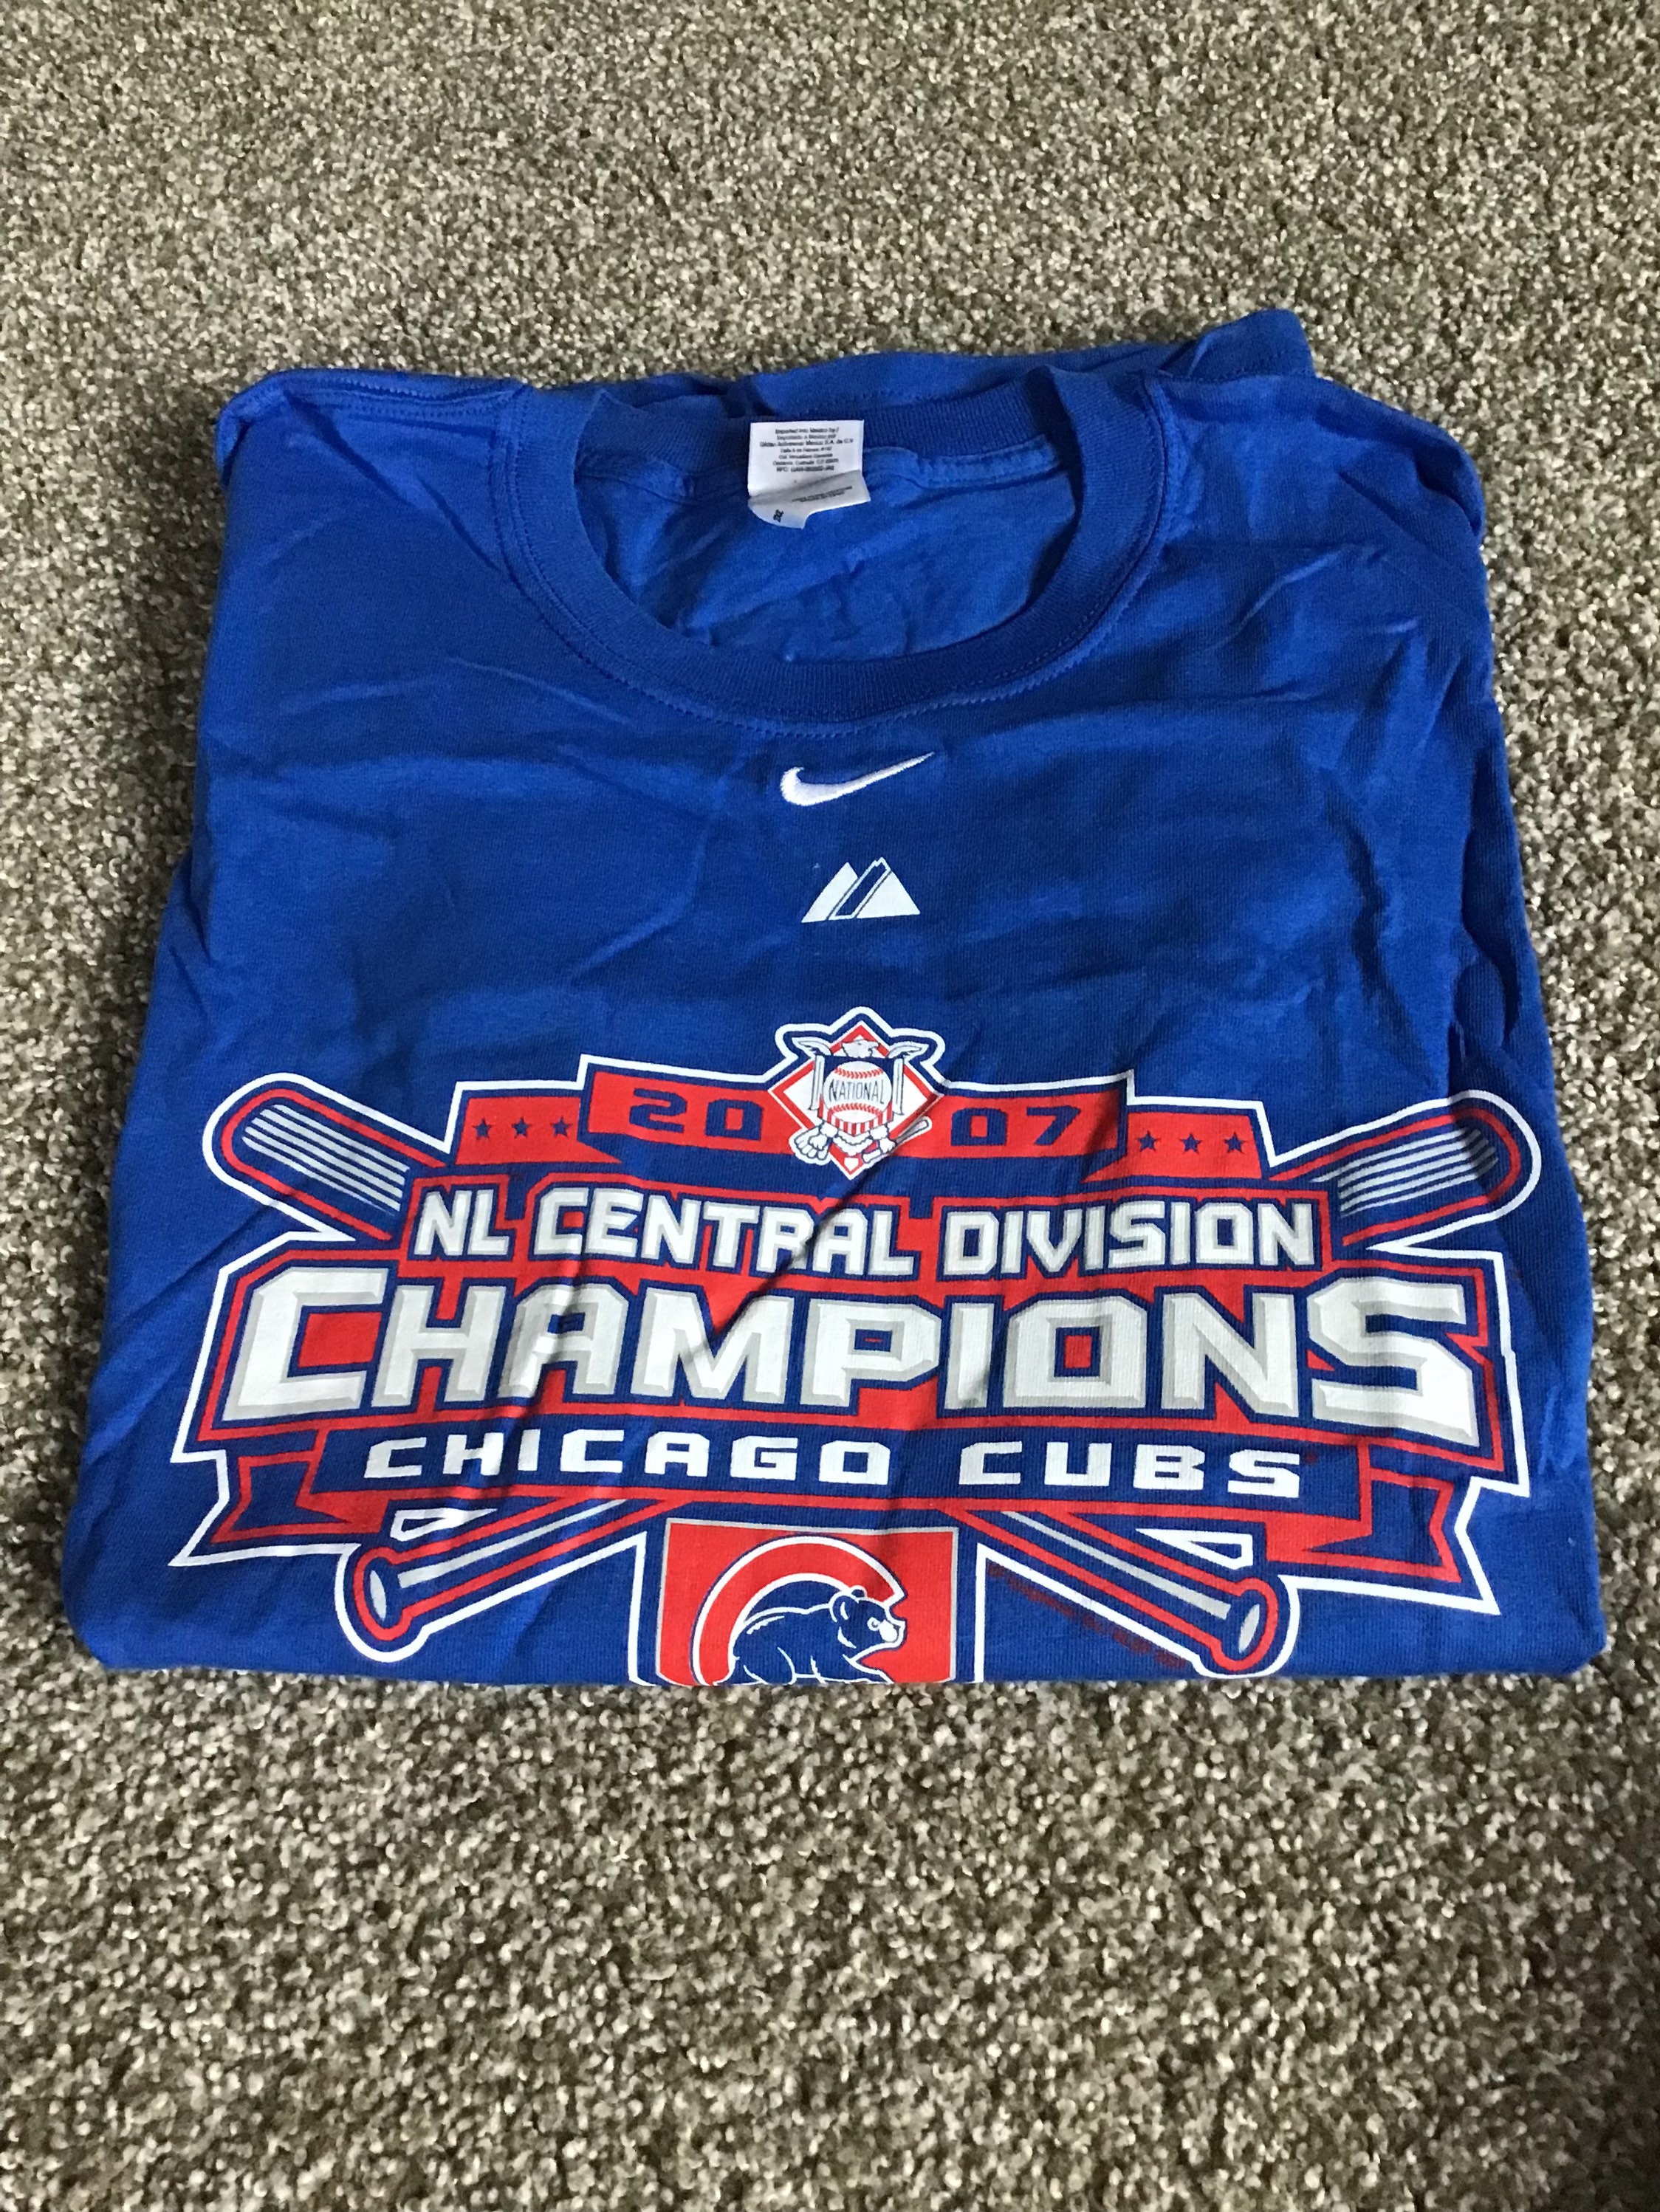 BRANDWEIN14 Chicago Cubs 2007 NL Central Division Champions Blue Shirt XXL Brand New Great Item Awesome Rare Last One